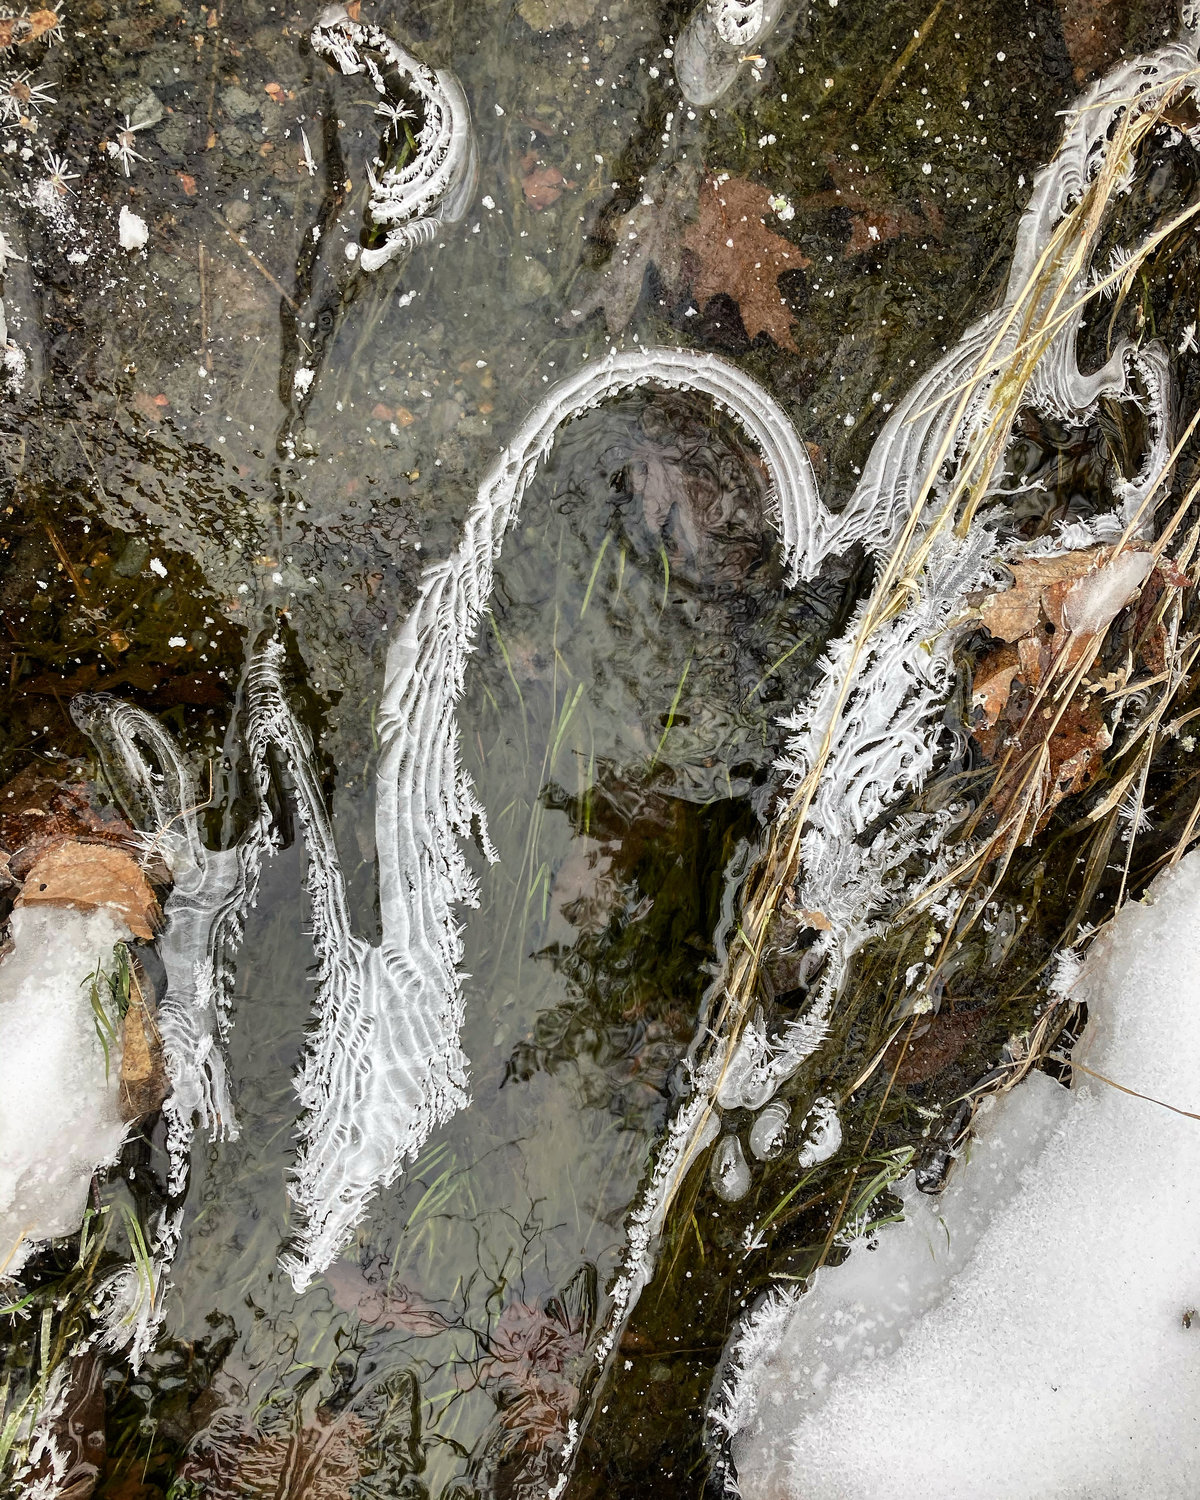 Watch for artful expressions of ice while taking a winter walk.